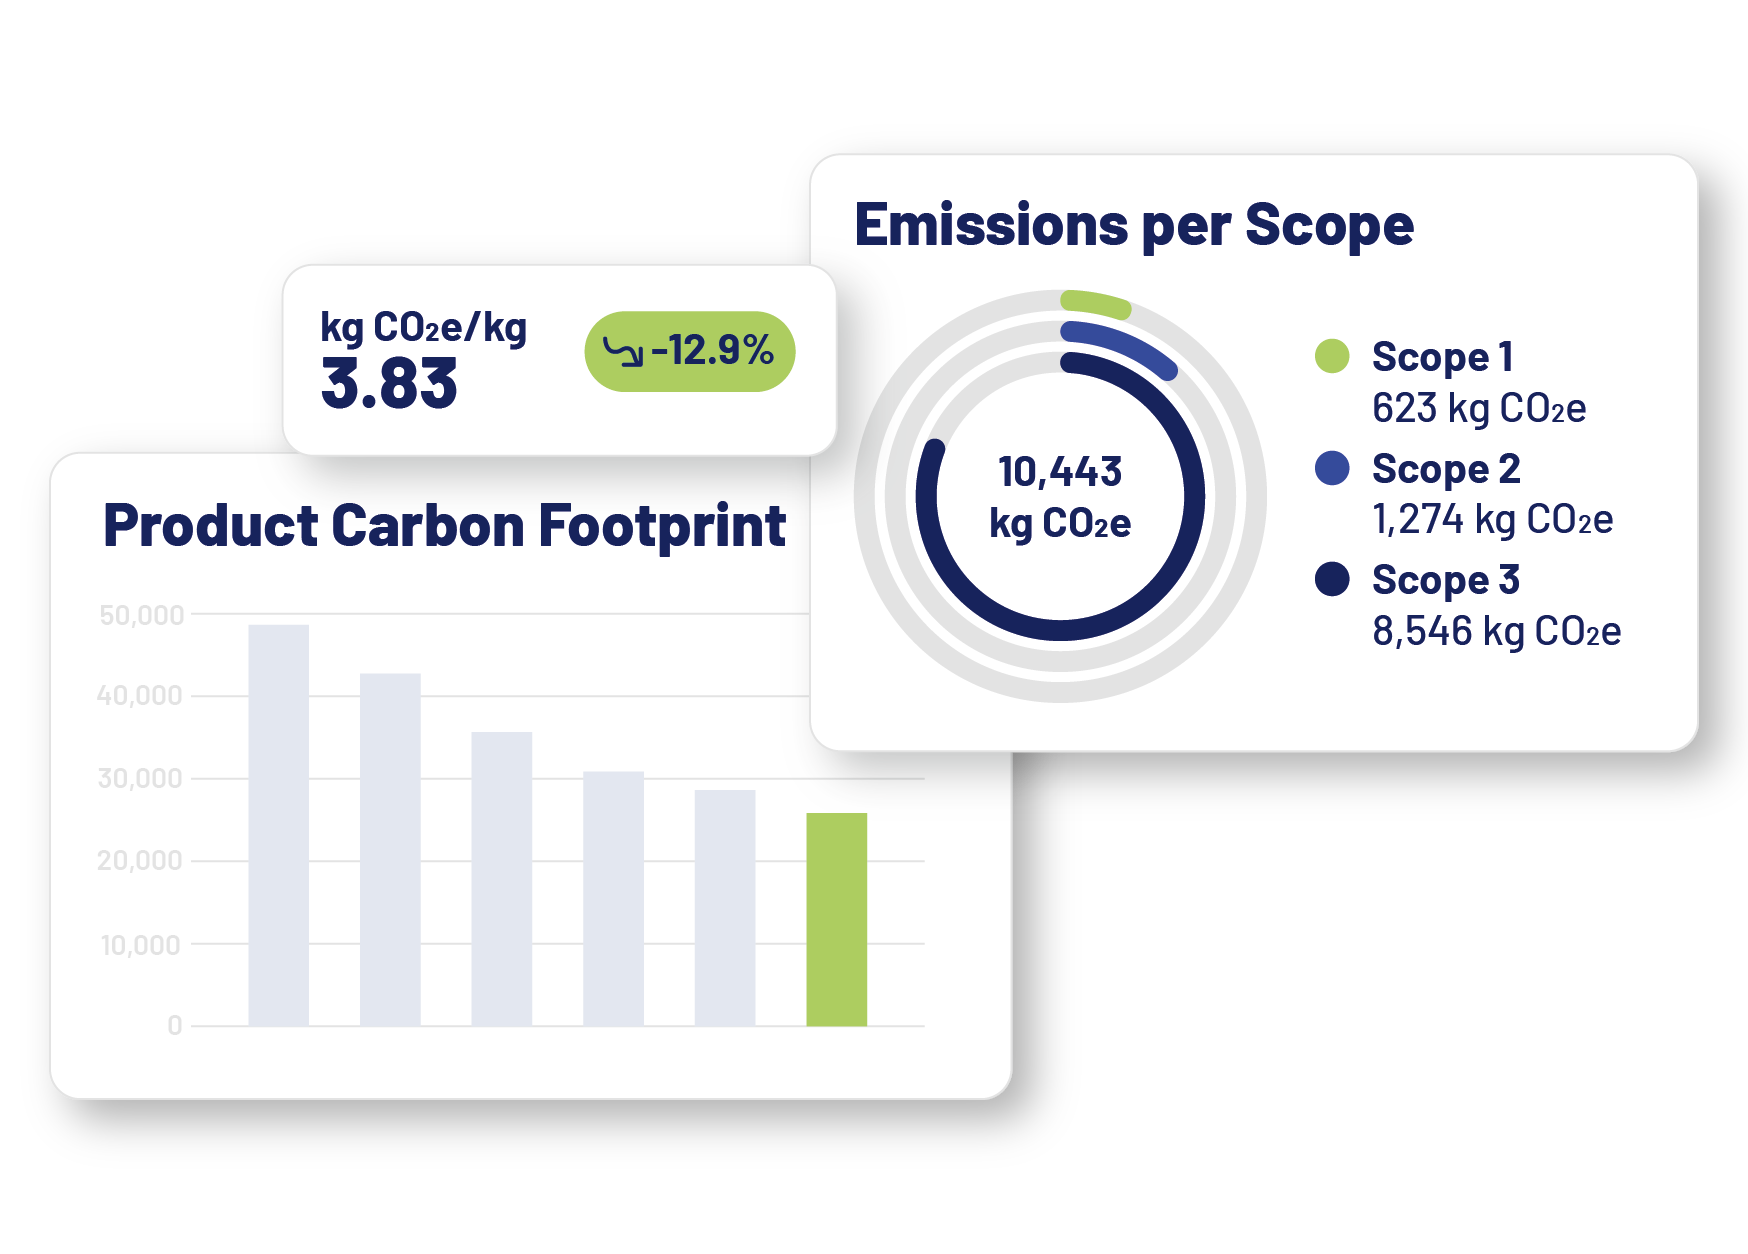 Infographic on various analyses of a product's CO2 emissions, with bar chart for reduction and analysis per scope according to the GHG protocol